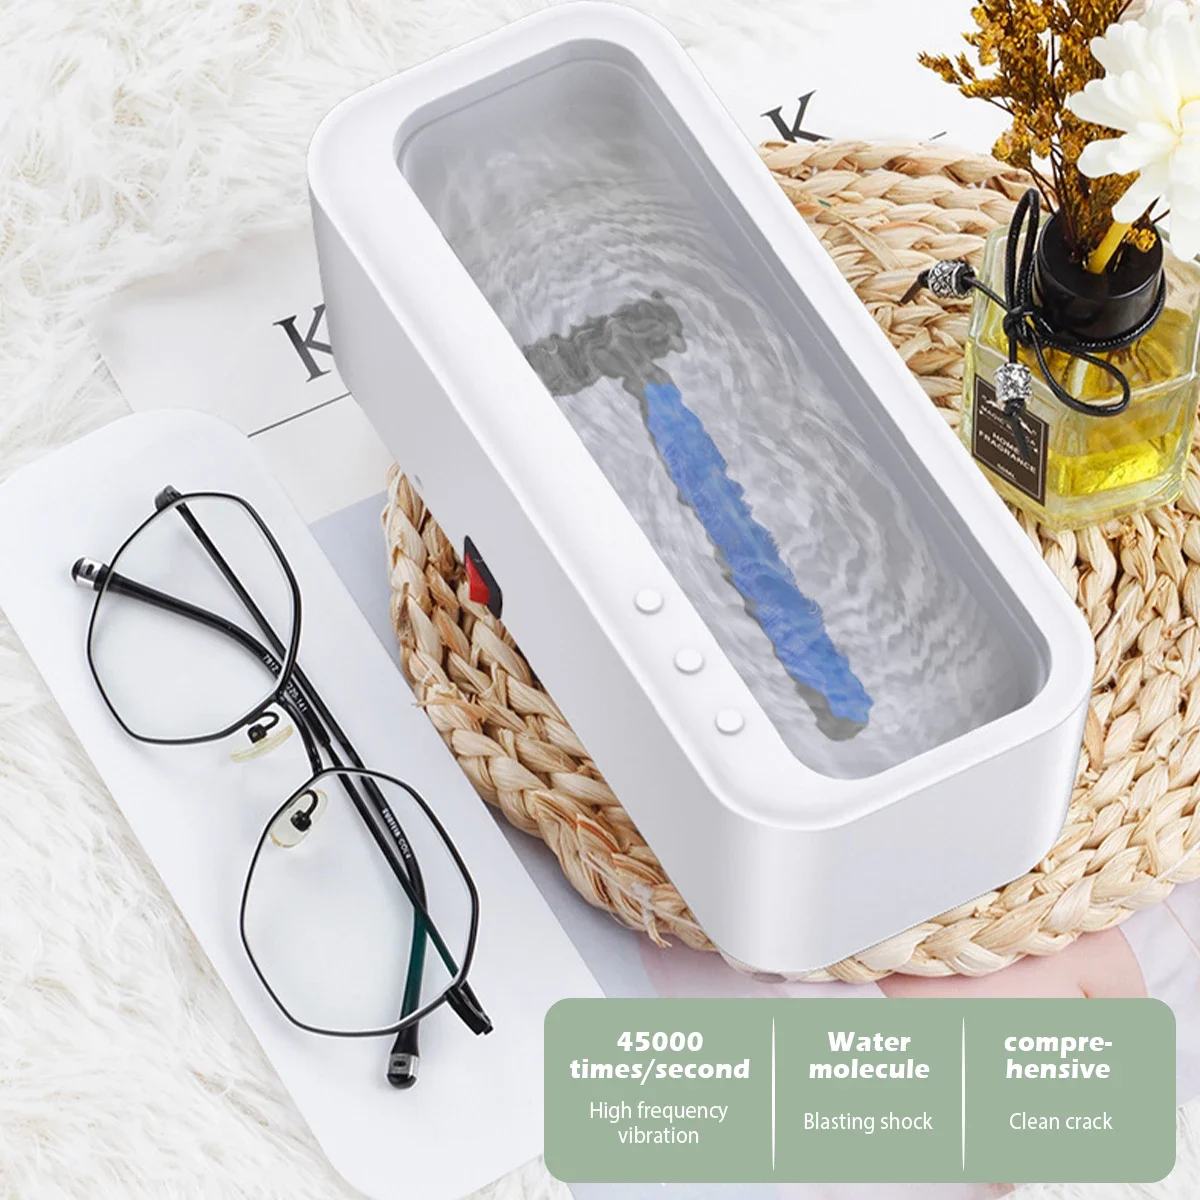 Ultrasonic Cleaner High Frequency Vibration Wash Cleaner Portable Multip... - $7.93